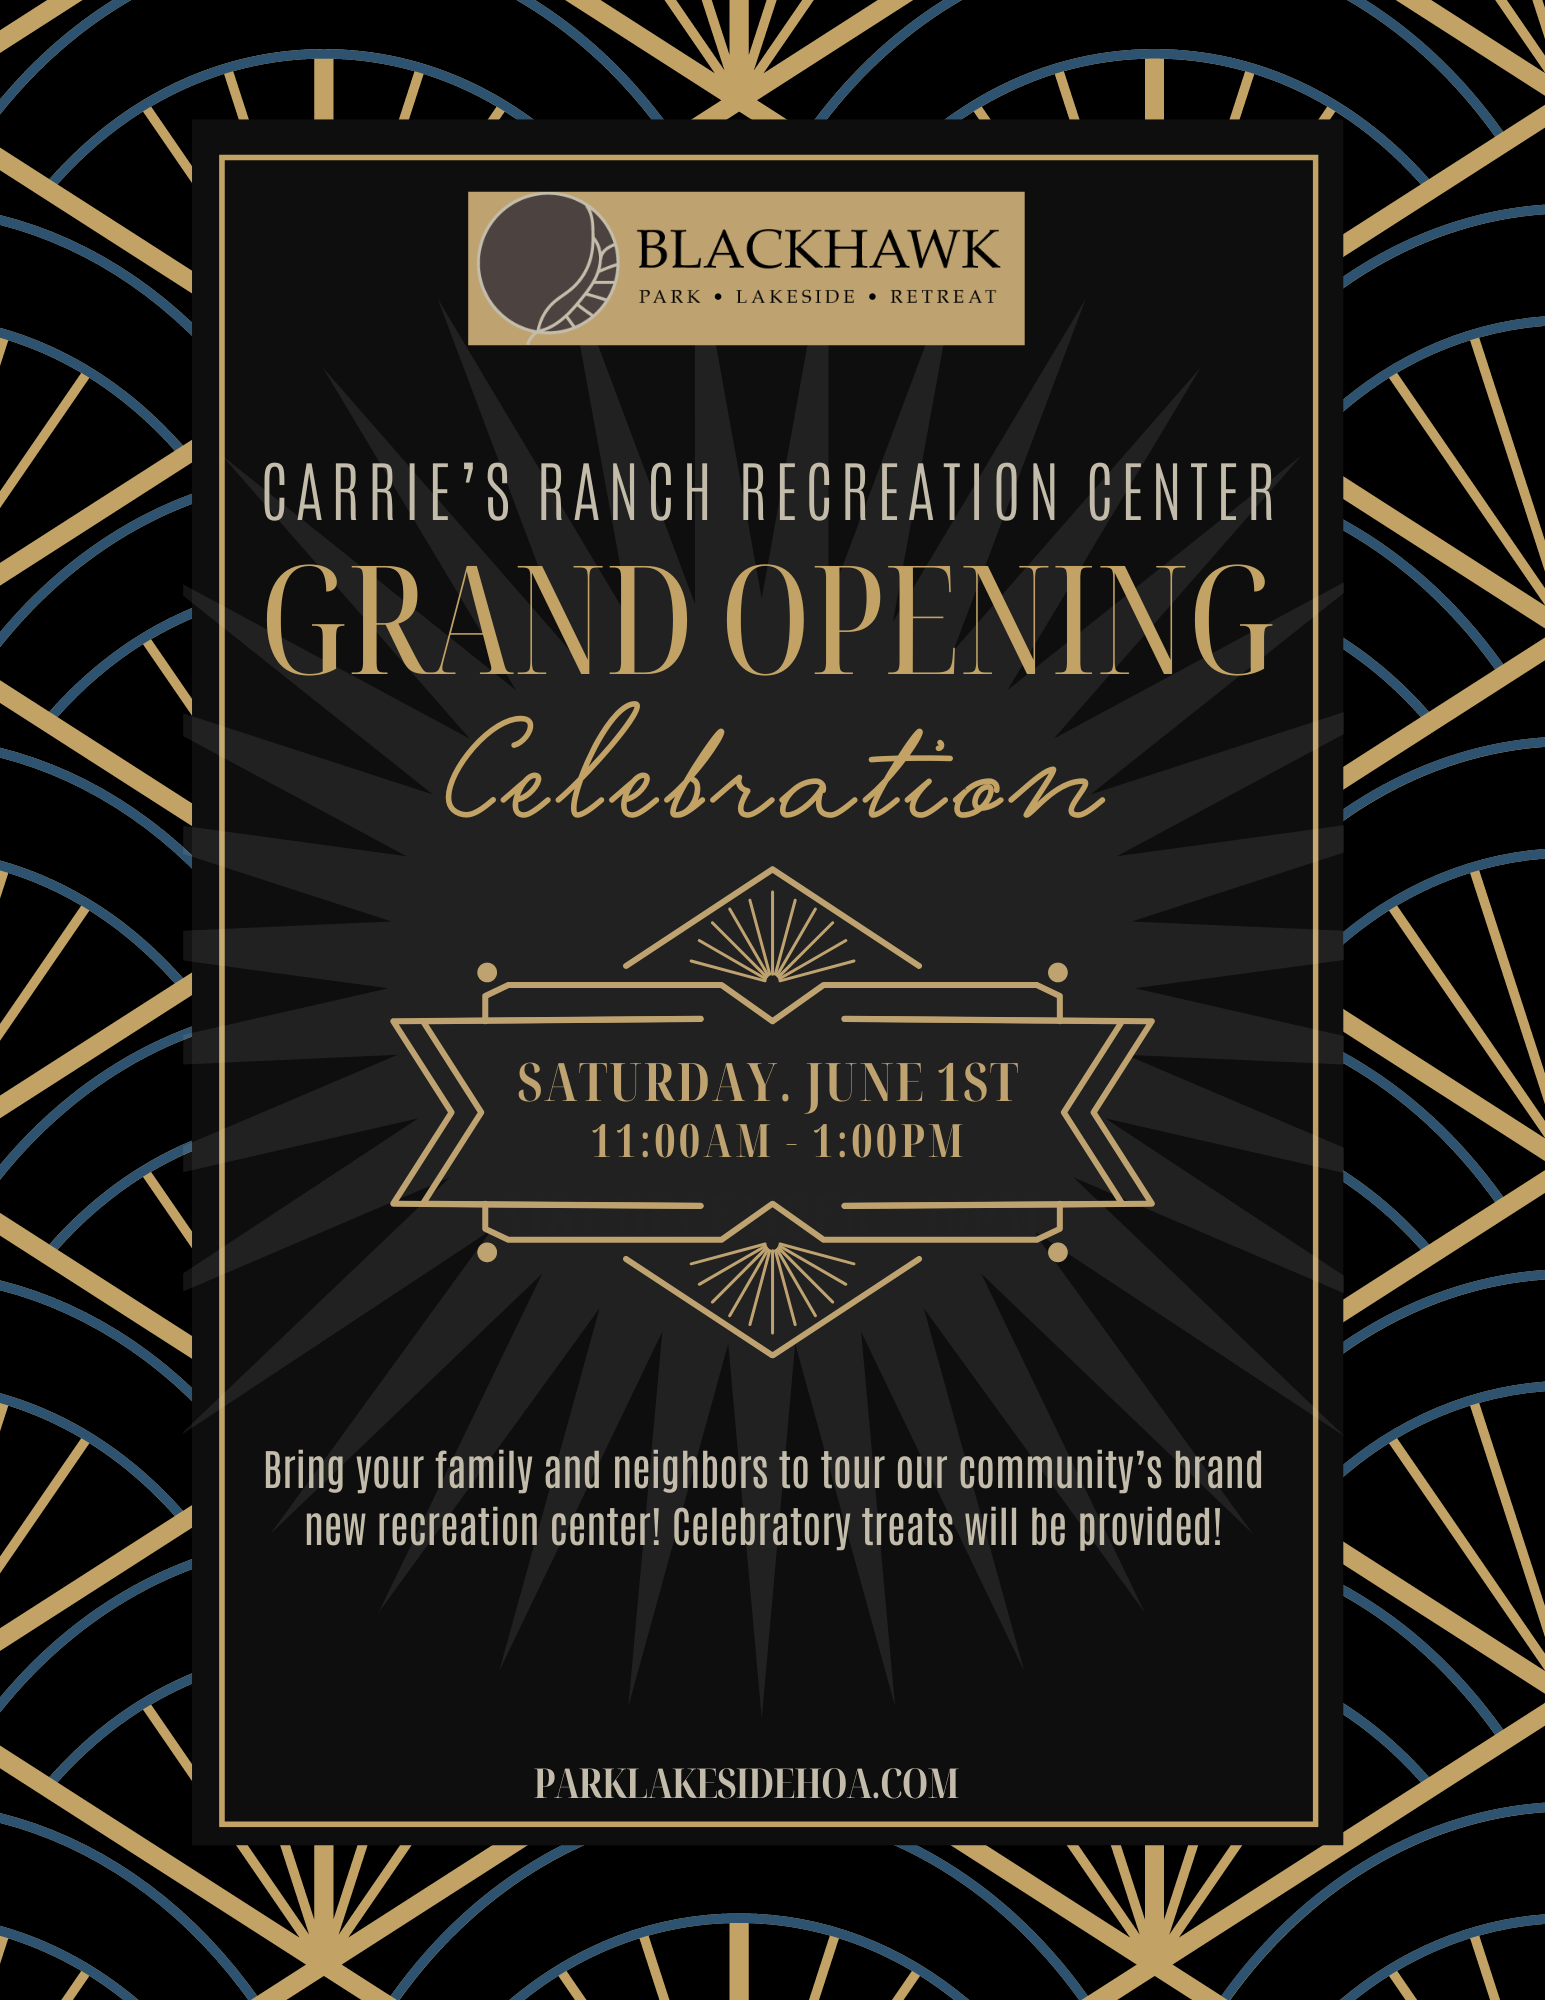 A grand opening flyer for Carrie’s Ranch Recreation Center, scheduled for Saturday, June 1st, from 11:00 am to 1:00 pm. The flyer has an Art Deco style with a black and gold color scheme featuring geometric patterns and lines radiating from the text, which is presented in elegant, stylized fonts. The Blackhawk Park Lakeside Retreat logo is at the top, and the bottom invites the community to bring family and neighbors for a tour with celebratory treats provided. The website 'PARKLAKESIDEHOA.COM' is listed at the bottom.